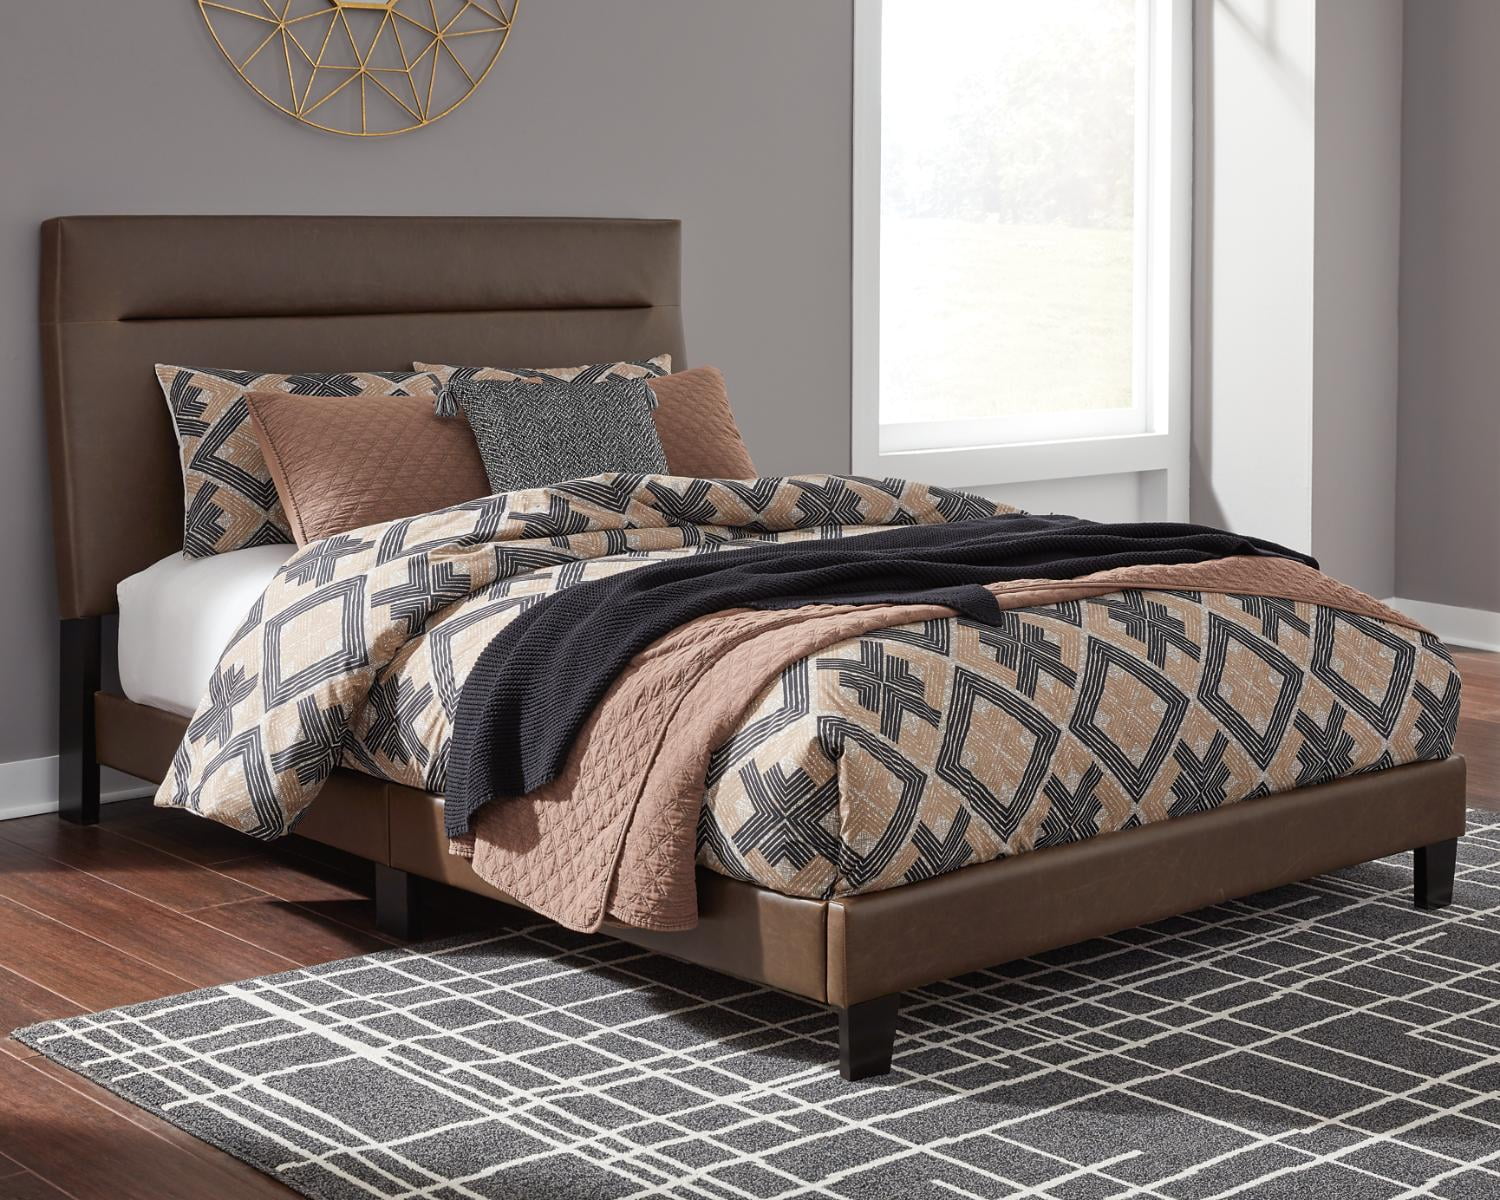 Signature Design by Ashley Adelloni Brown King Upholstered Bed Frame